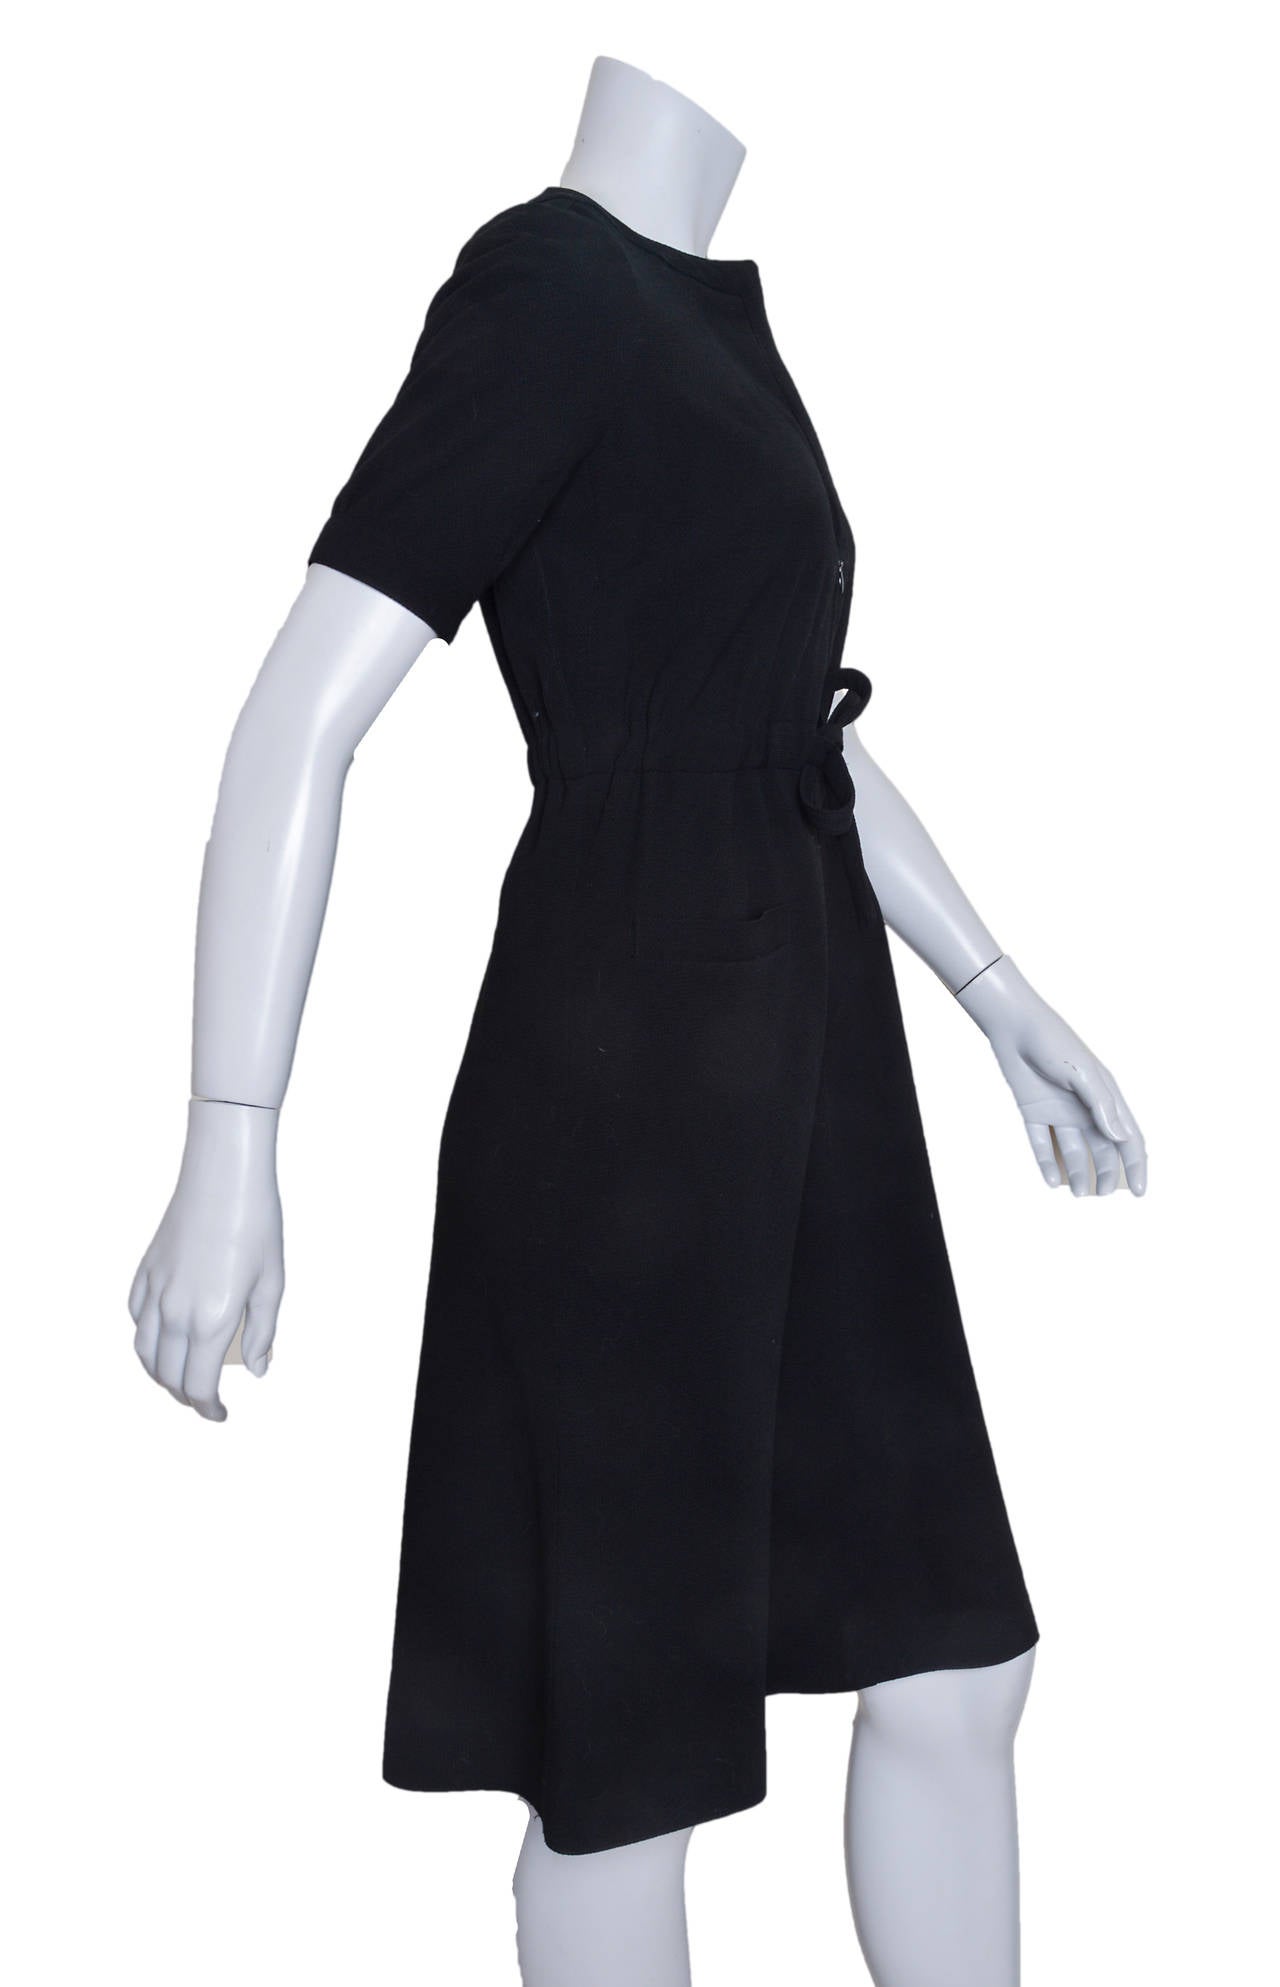 Courreges Hyperbole Classic Black Dress In Excellent Condition For Sale In Oakland, CA